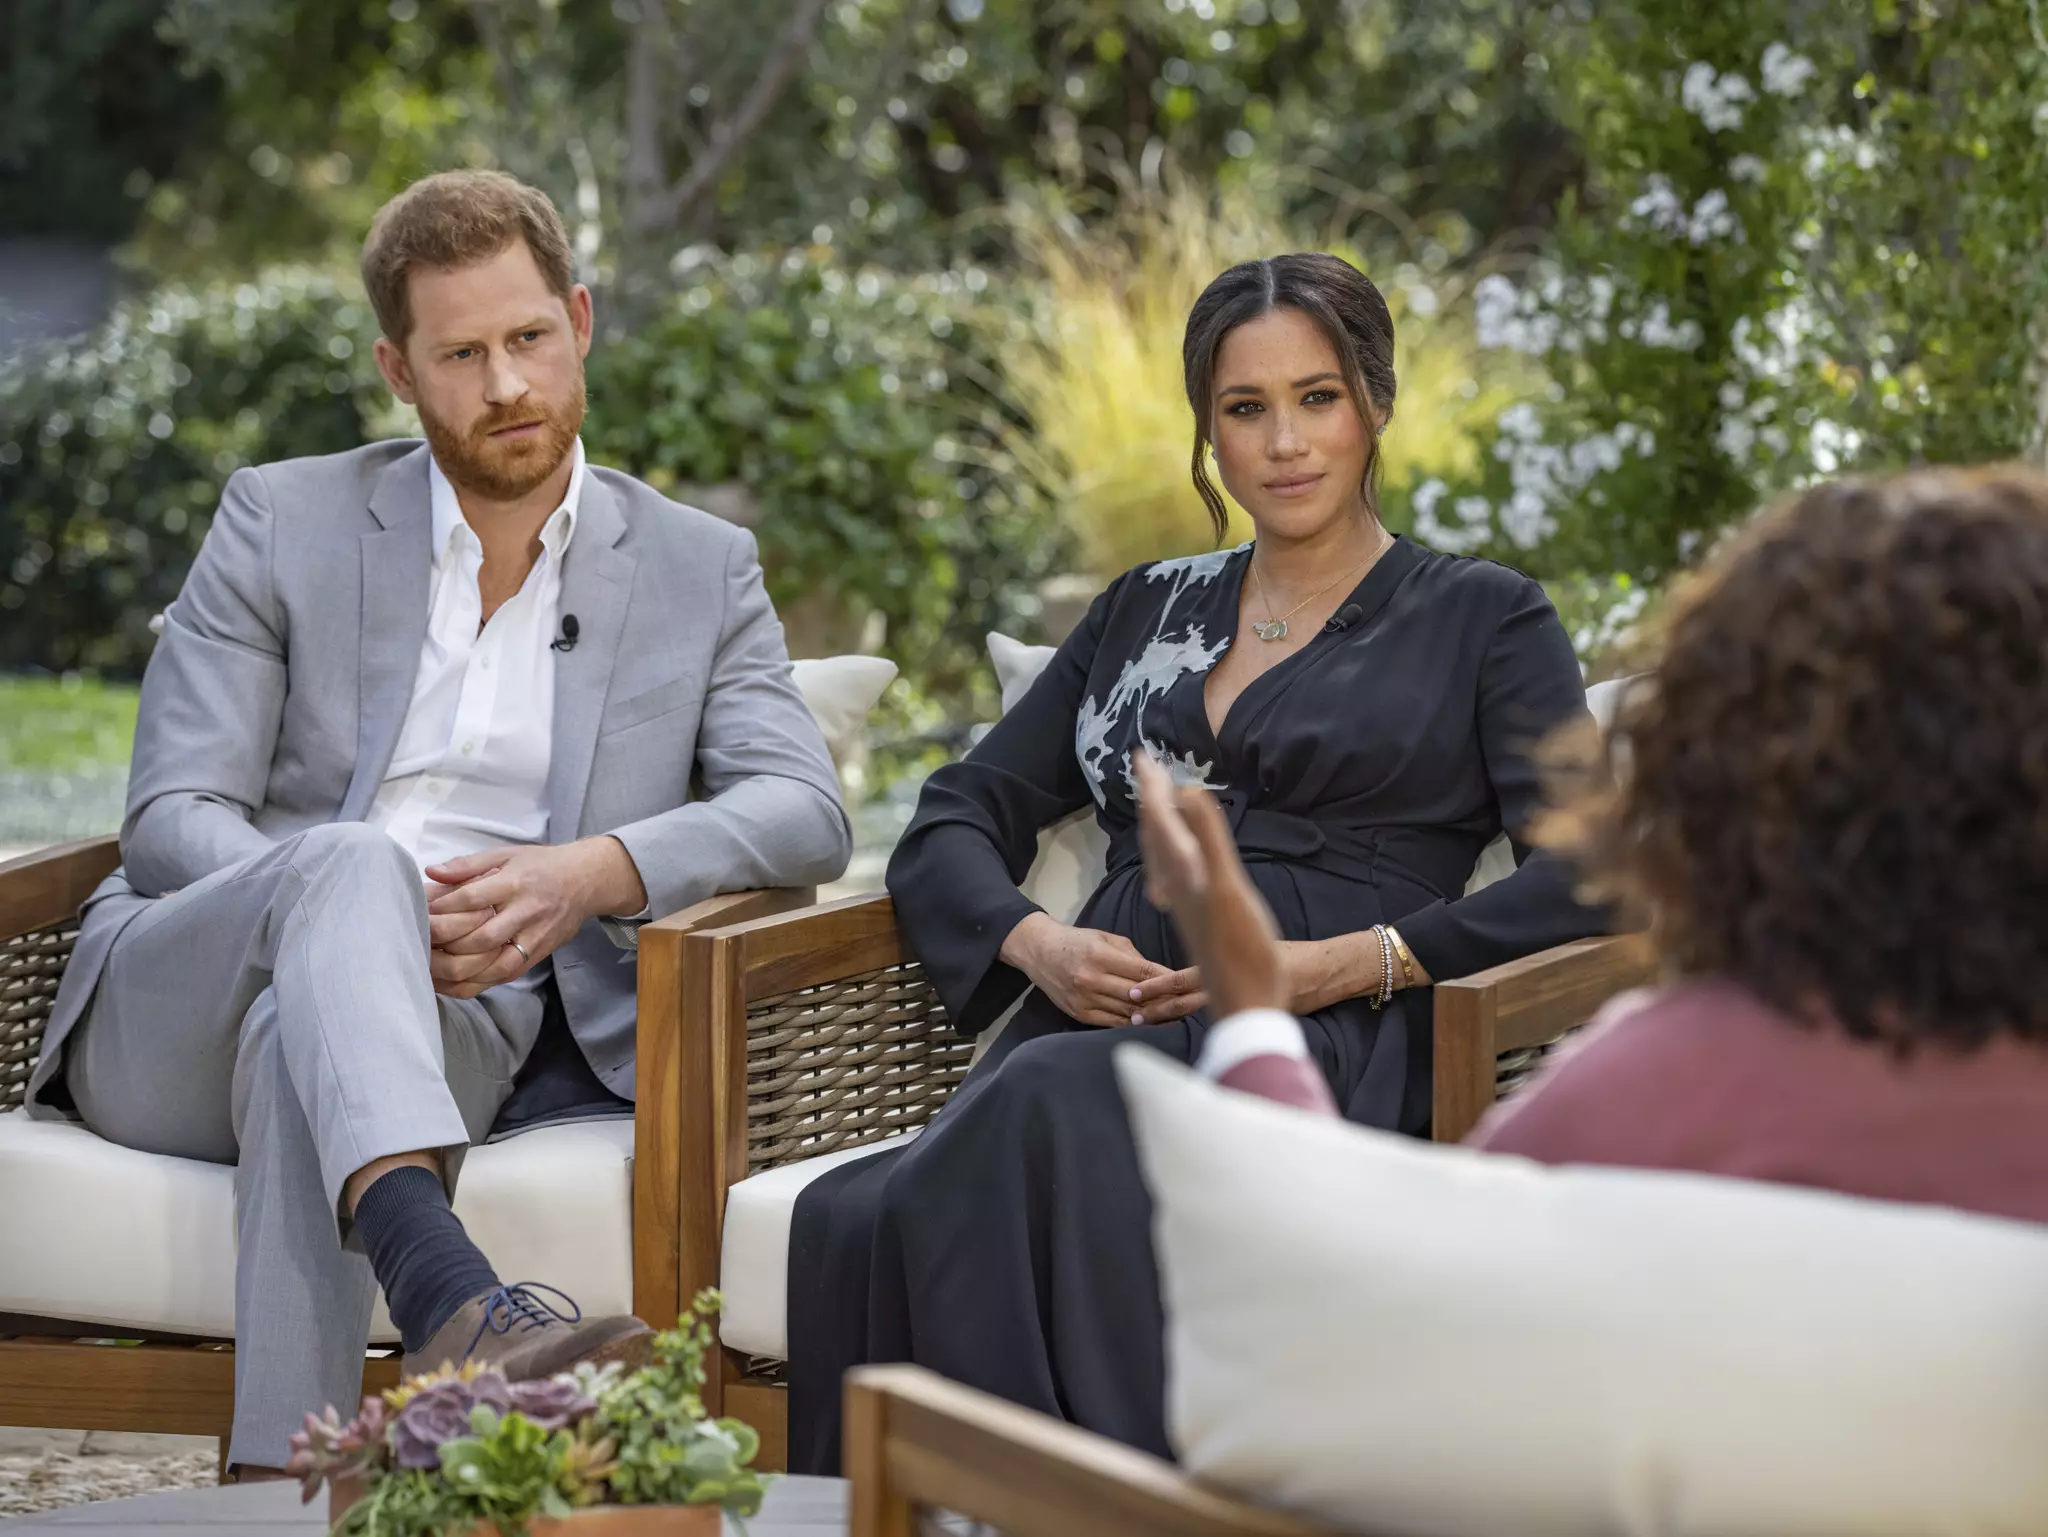 Harry and Meghan were interviewed by Oprah and discussed lots of topics that made headline news (